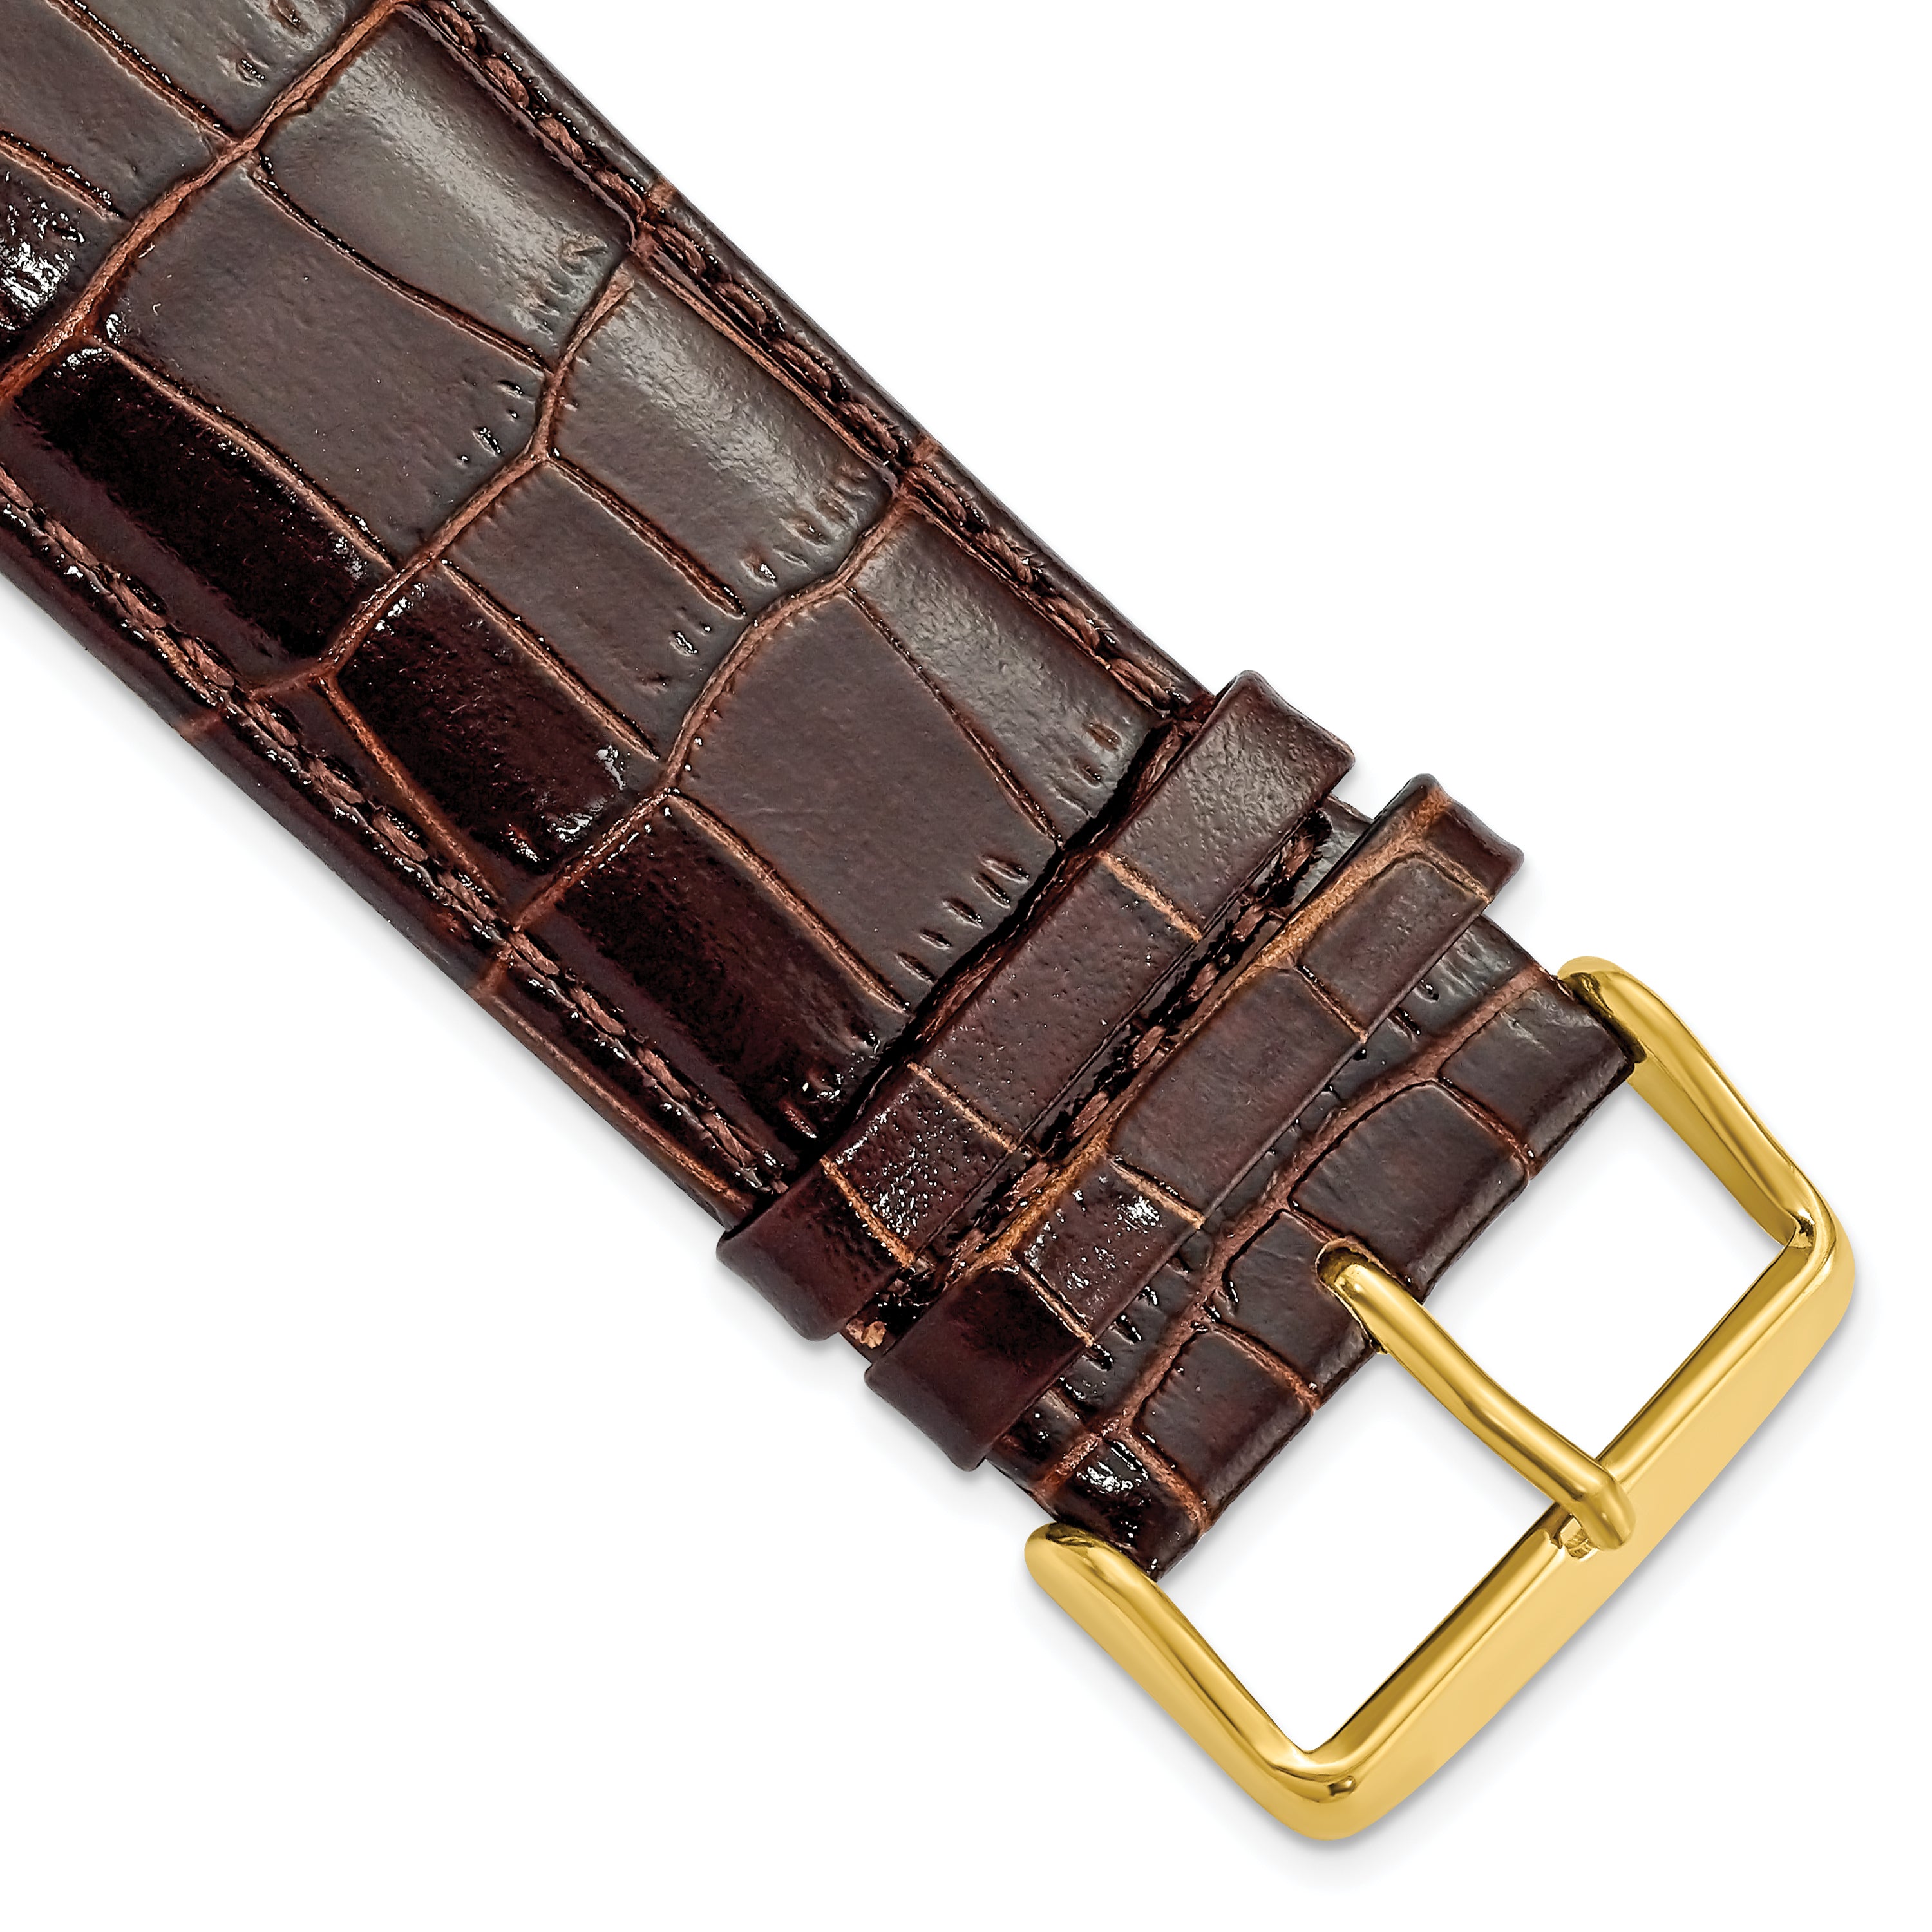 DeBeer 28mm Dark Brown Crocodile Grain Chronograph Leather with Gold-tone Buckle 7.5 inch Watch Band